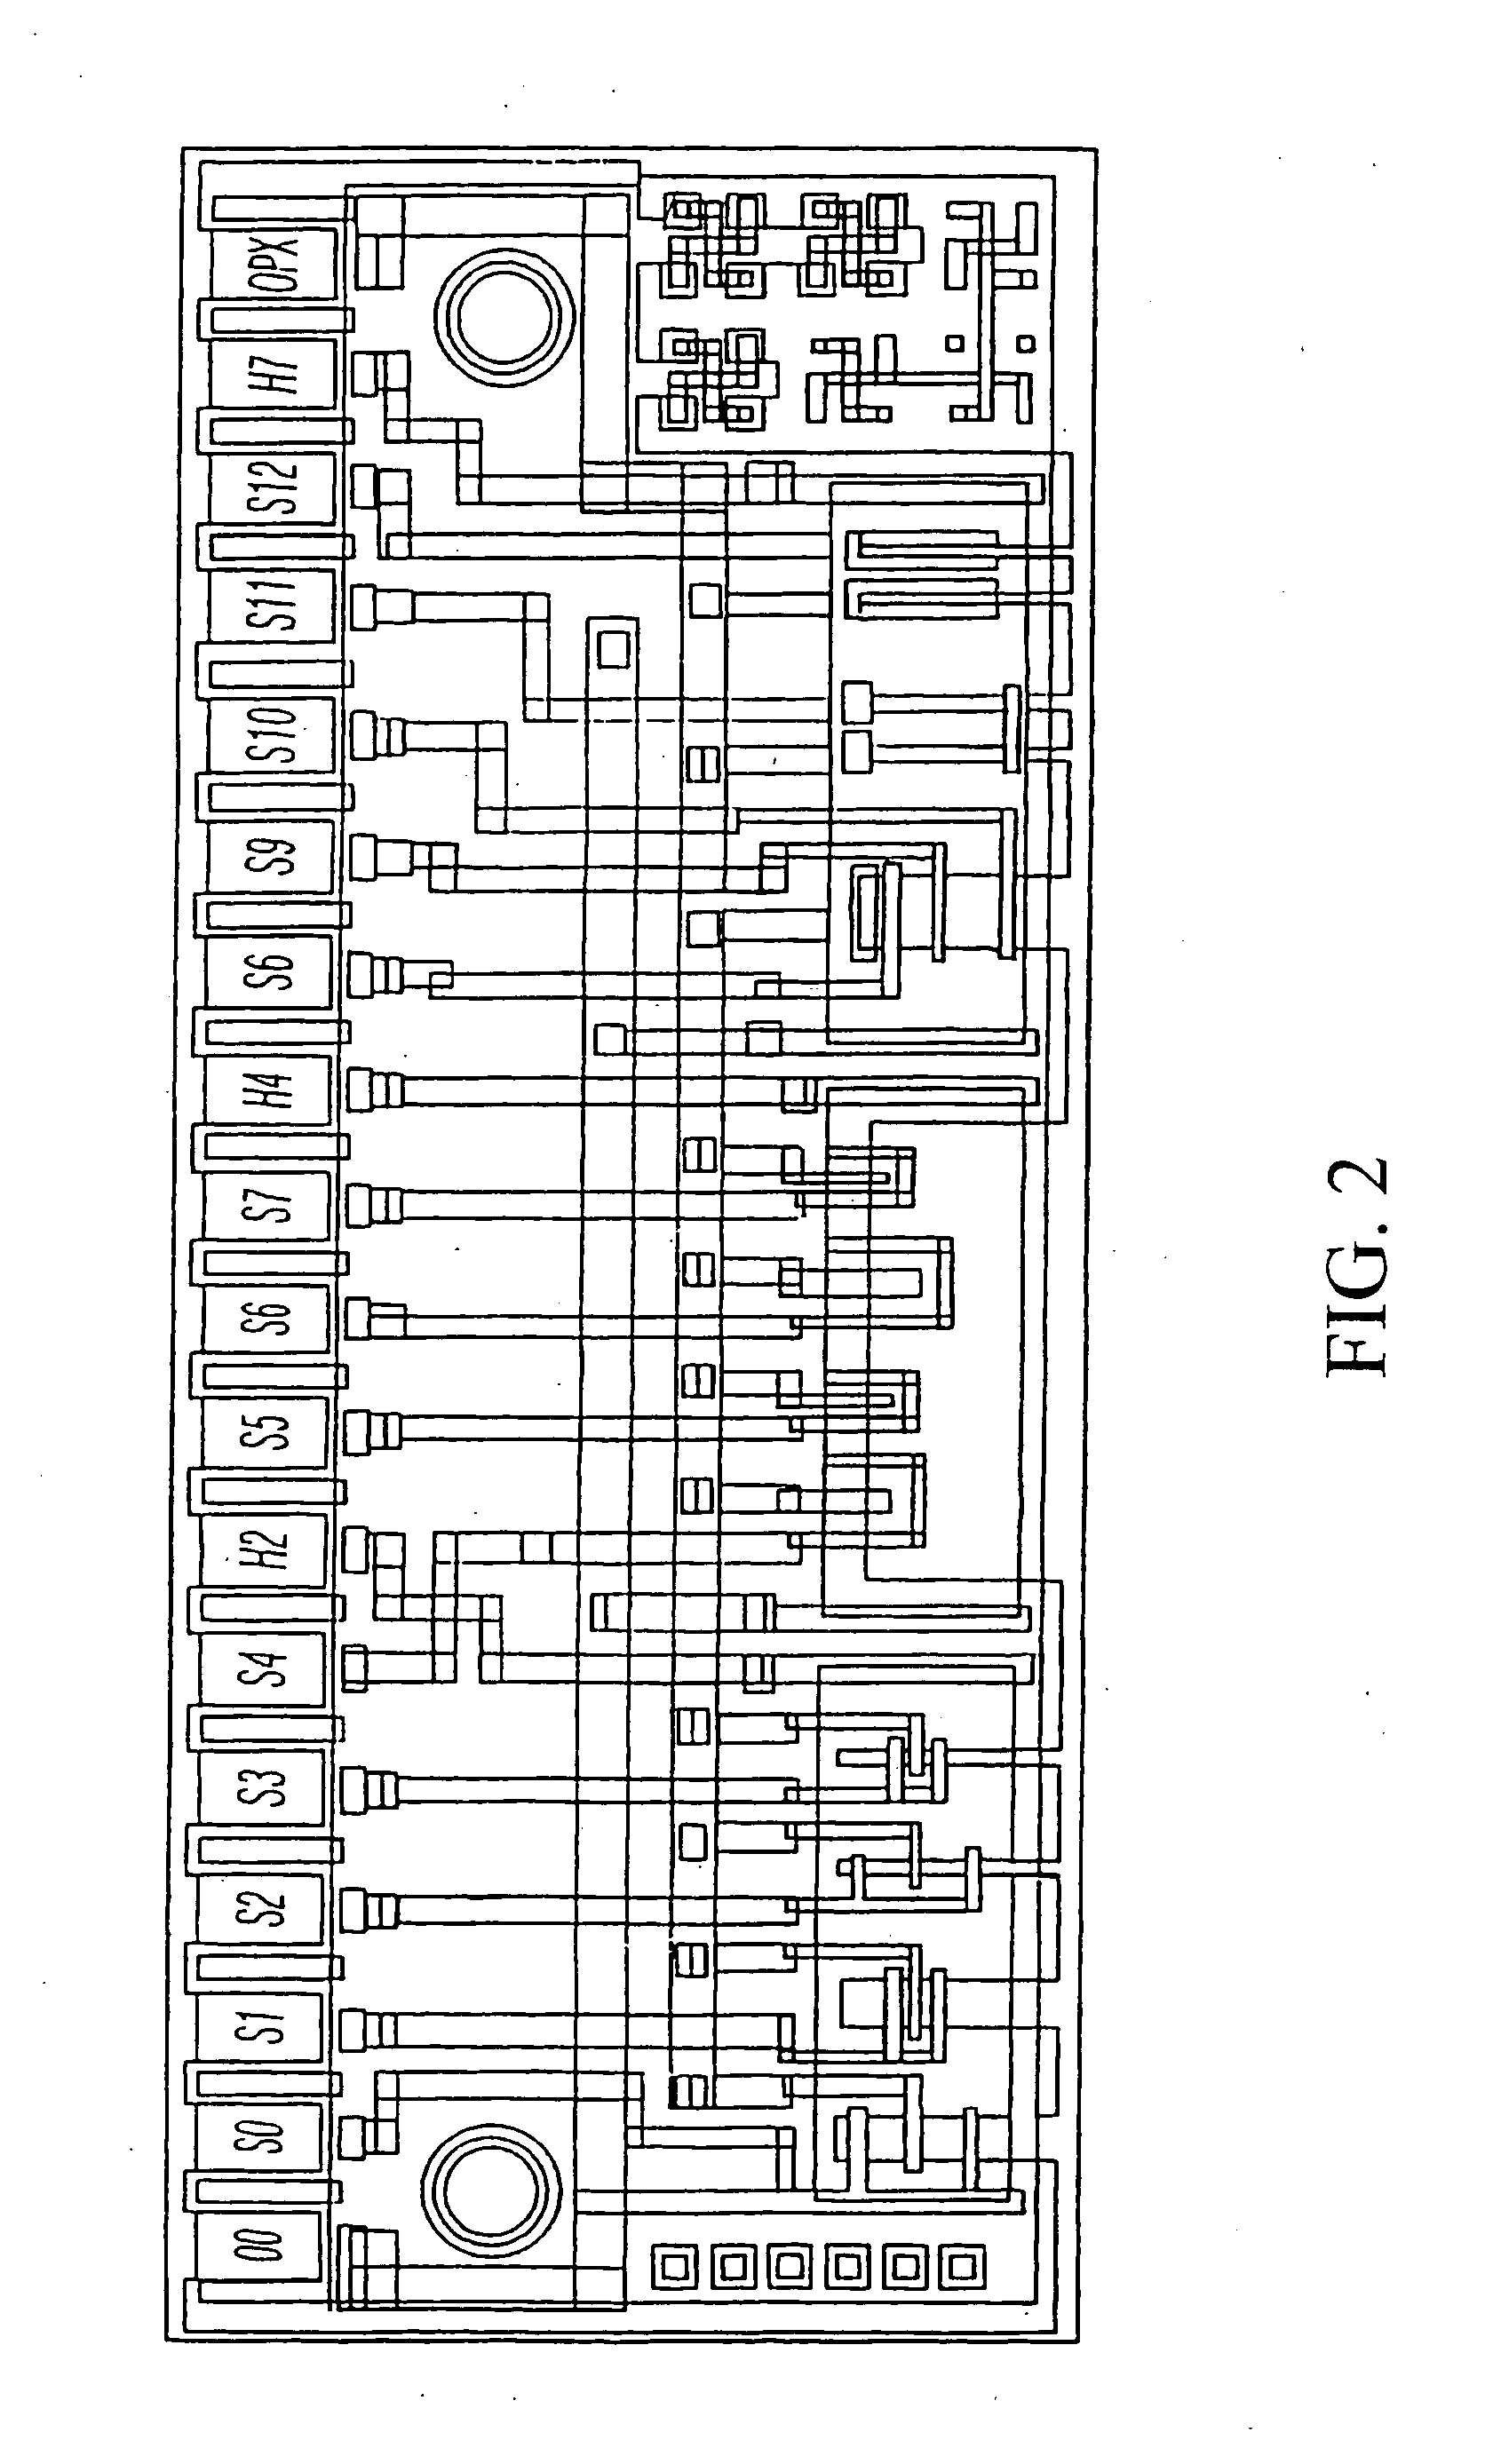 System and method for therapeutic drug monitoring